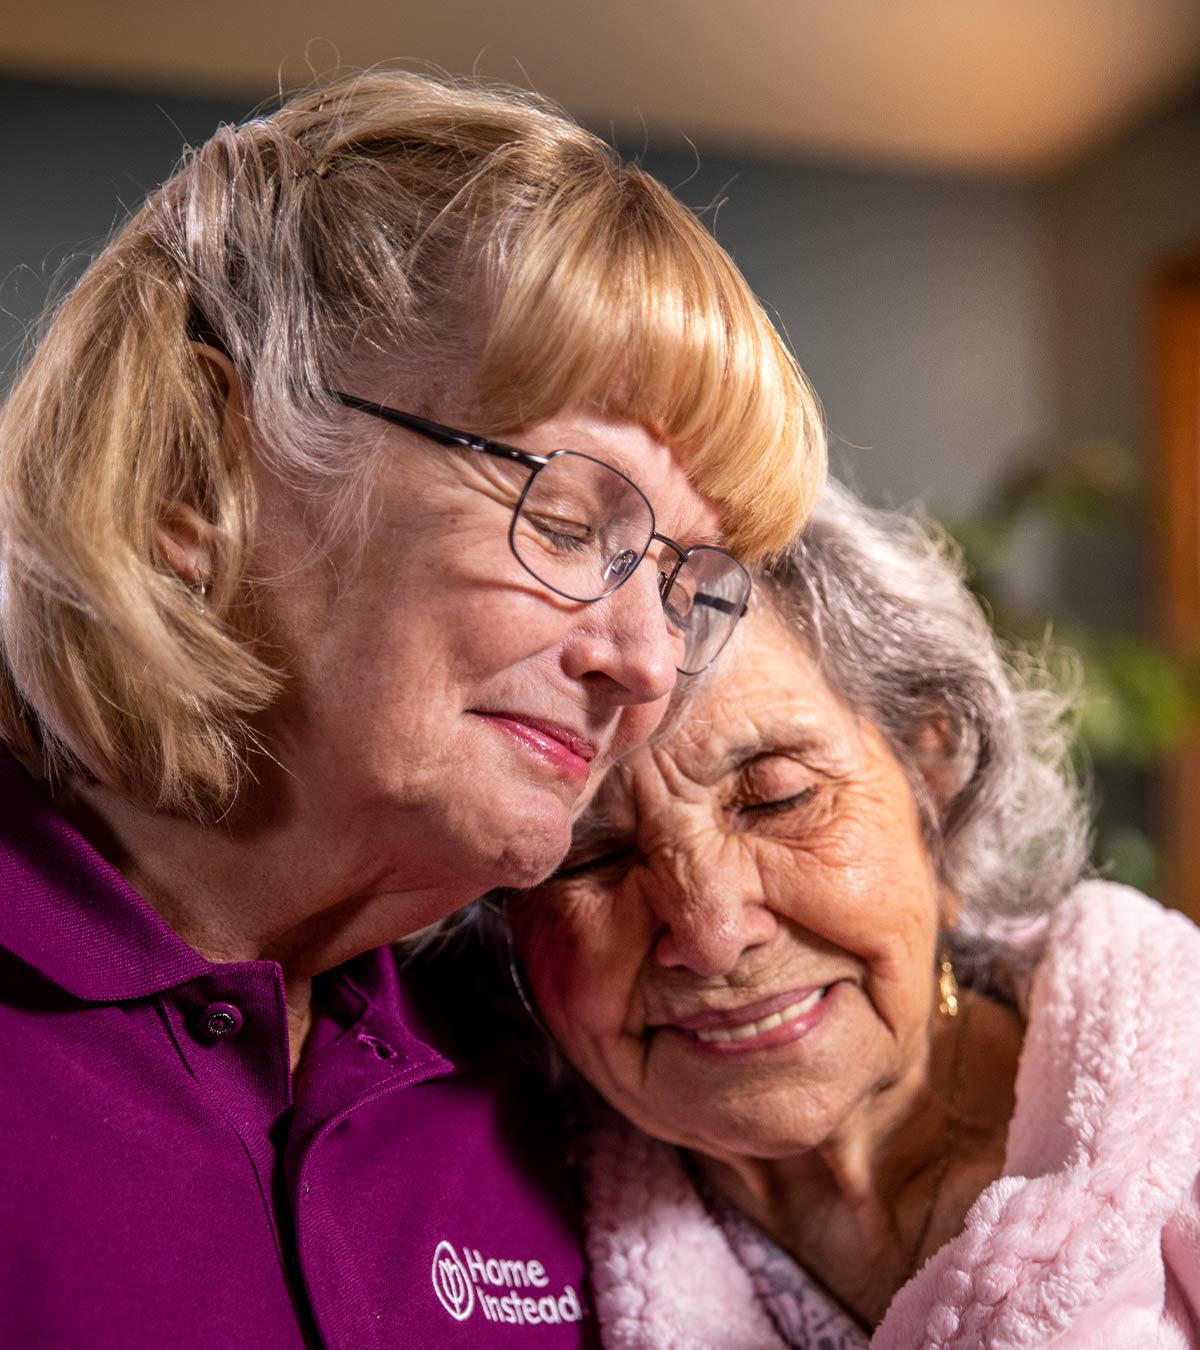 CAREGiver providing in-home senior care services. Home Instead of Tolland, CT provides Elder Care to aging adults. 